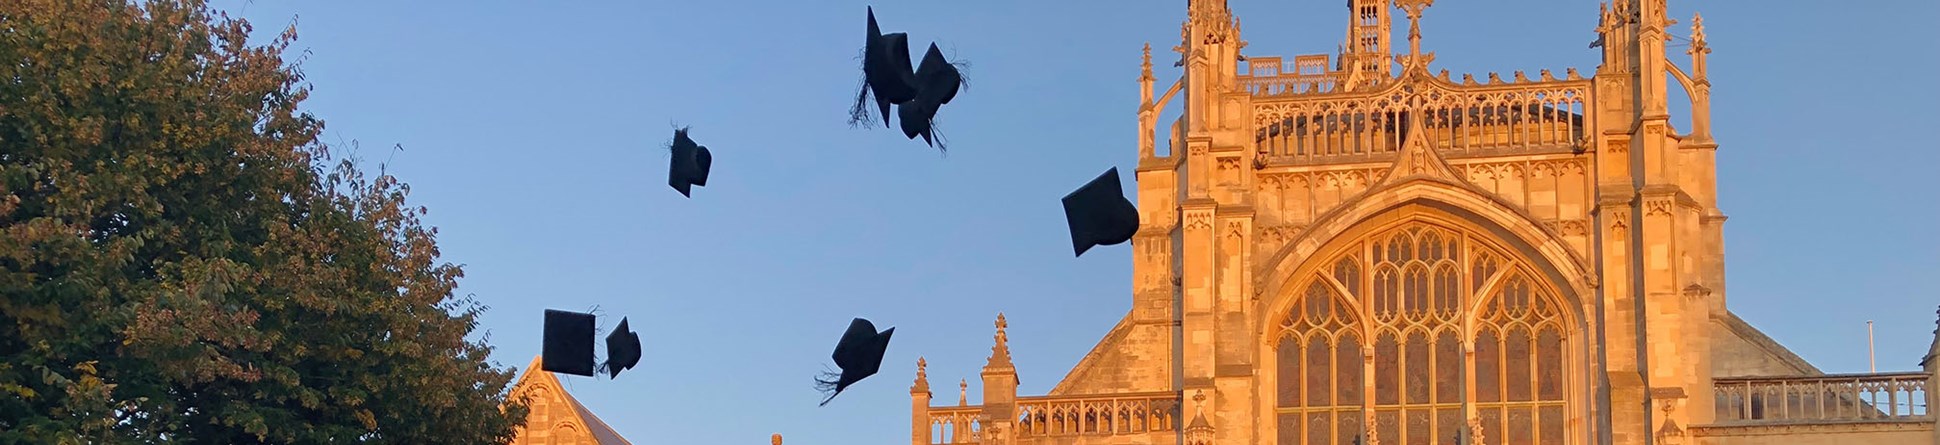 A group wearing graduation gowns throw their mortar boards in the air to celebrate. Behind them, light from the setting sun turns Gloucester Cathedral orange against a blue sky.